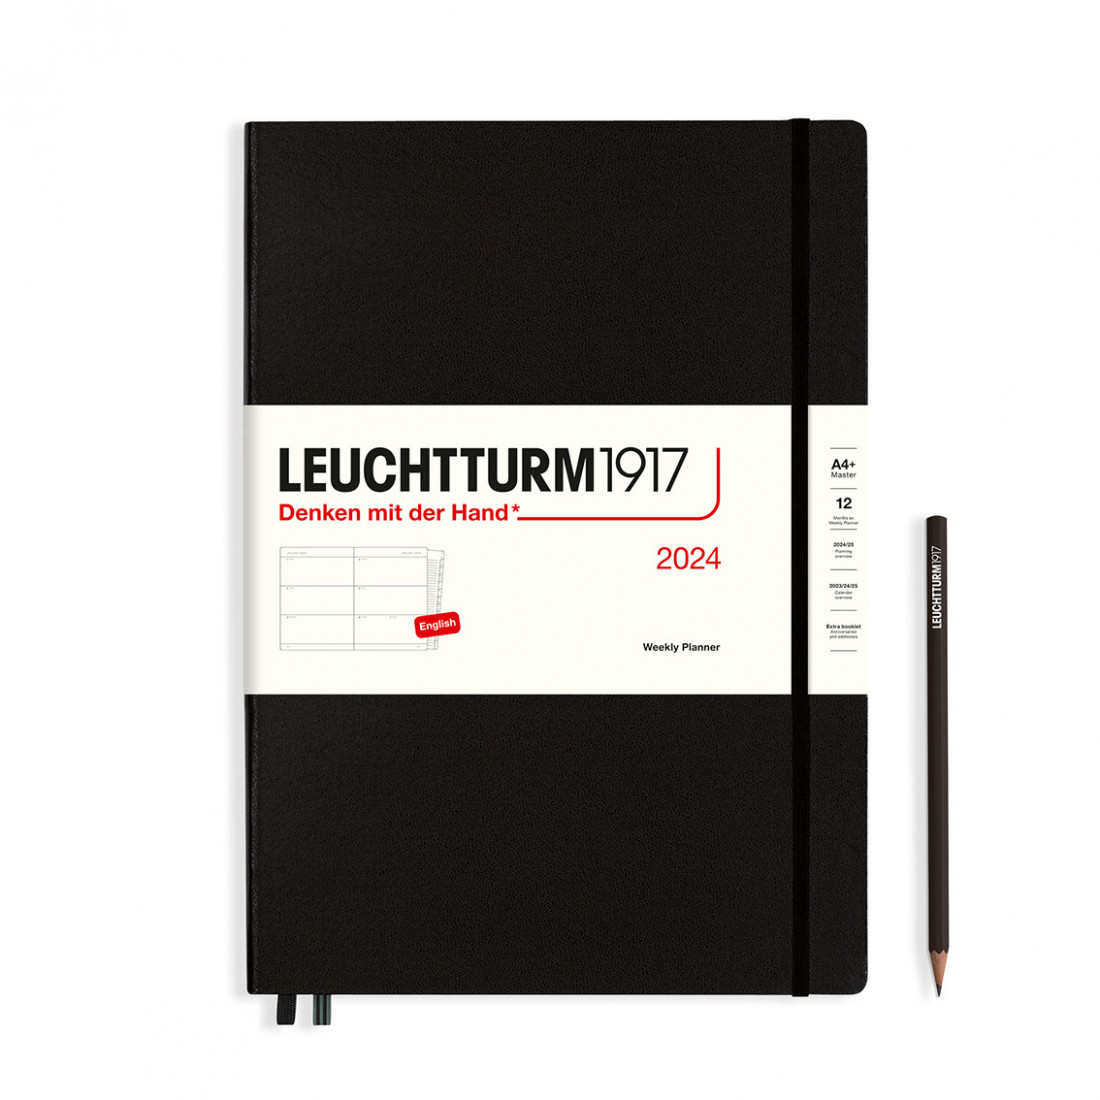 Leuchtturm 1917 Weekly Planner 2024 Black Master A4 Plus Hard Cover